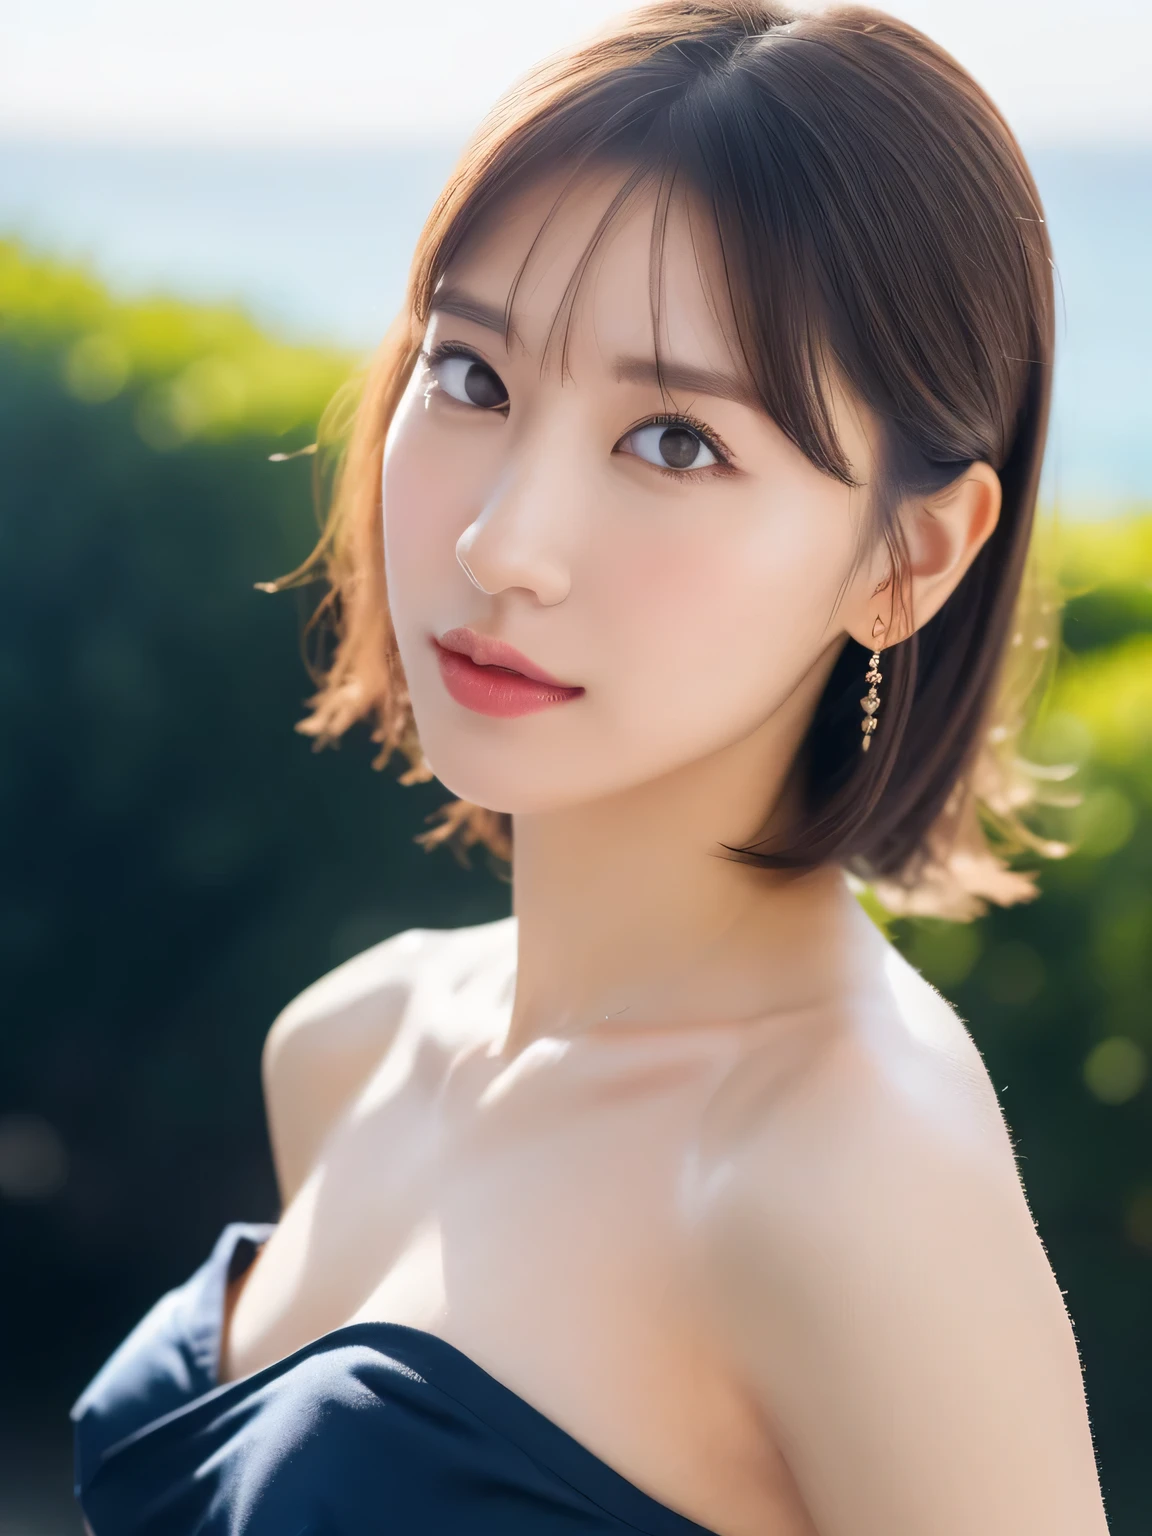 ((highest quality, 8K, masterpiece :1.3)), (realistic, Photoreal:1.4), sharp focus：1.2, 
Bright colors, professional level, shallow depth of field, 
20-year-old, 1 person, A beautiful face with intelligence, 
Supple body :1.3, model body shape:1.5, 頭w:1.4, perfect style：1.4, 
narrow shoulders, beautiful clavicle, long and thin legs, The beauty of slim abs :1.2, thin waist :1.2, 
super detailed skin, Fair skin, Shiny skin, 
super detailed face, slim facial contour, beautiful small face, Beautiful lined nose, 
super detailed eyes, long slit eyes, brown eyes, double eyelid, beautiful thin eyebrows, fine long eyelashes, 
super detailed lips, plump lips, glossy pink lips, flushed cheeks, beautiful teeth, 
Beautiful actress&#39;s ennui makeup, pink lipstick, silver necklace, earrings, 
light brown hair, delicate soft hair, 
(hair up, short hair, ponytail :1.2), layer cut, (dull bangs:1.2), 
(Dress up with trendy fashion:1.2), 
gentle smile, open mouth half way, Enchanted expression, stare at the camera, 
dynamic lighting, ((Hasselblad Photos)), 

((She is completely naked and wearing a tight navy blue satin camisole., Black lace on chest and hem:1.2)), 
(perfect breast shape, B cup:1.2), A small pink areola, 
She has a cute plump butt, My thighs are dazzling, 
(View from the front, Pay attention to the base of your thighs:1.2), 

blue sky and aegean sea, sea beach, The horizon of the ocean spreading out in the background, 
Posing with palms like a , spreading my legs, 
cinematic lighting, midsummer rays, Bright light shining all over, 